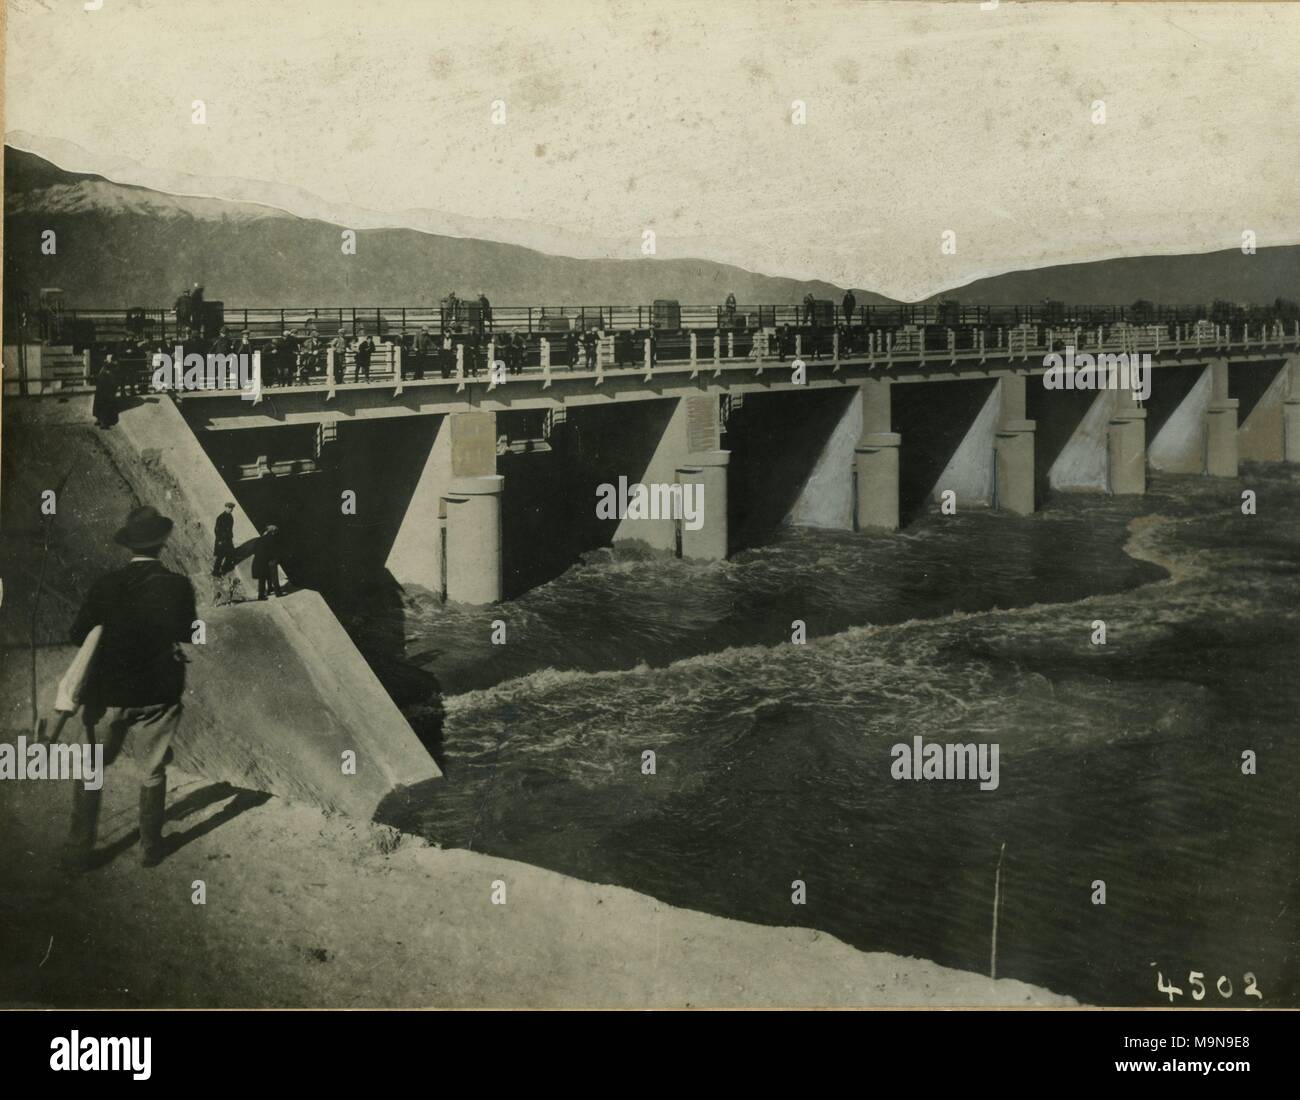 Construction of Dams, Weirs and Regulators Stock Photo